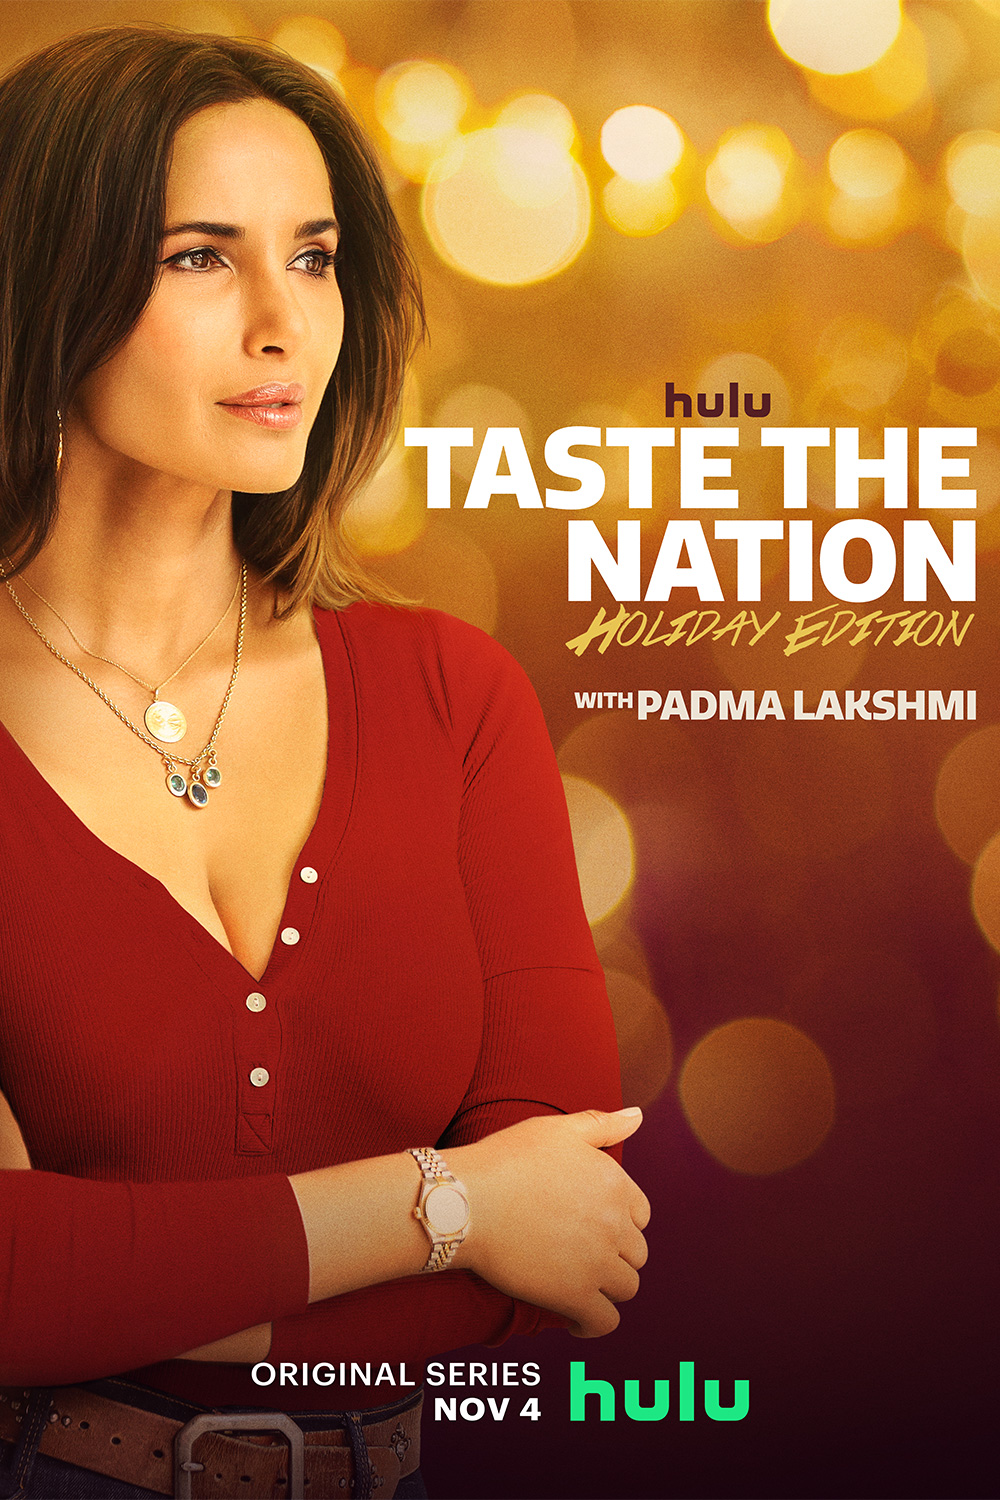 Is Taste the Nation with Padma Lakshmi Holiday Edition on Hulu